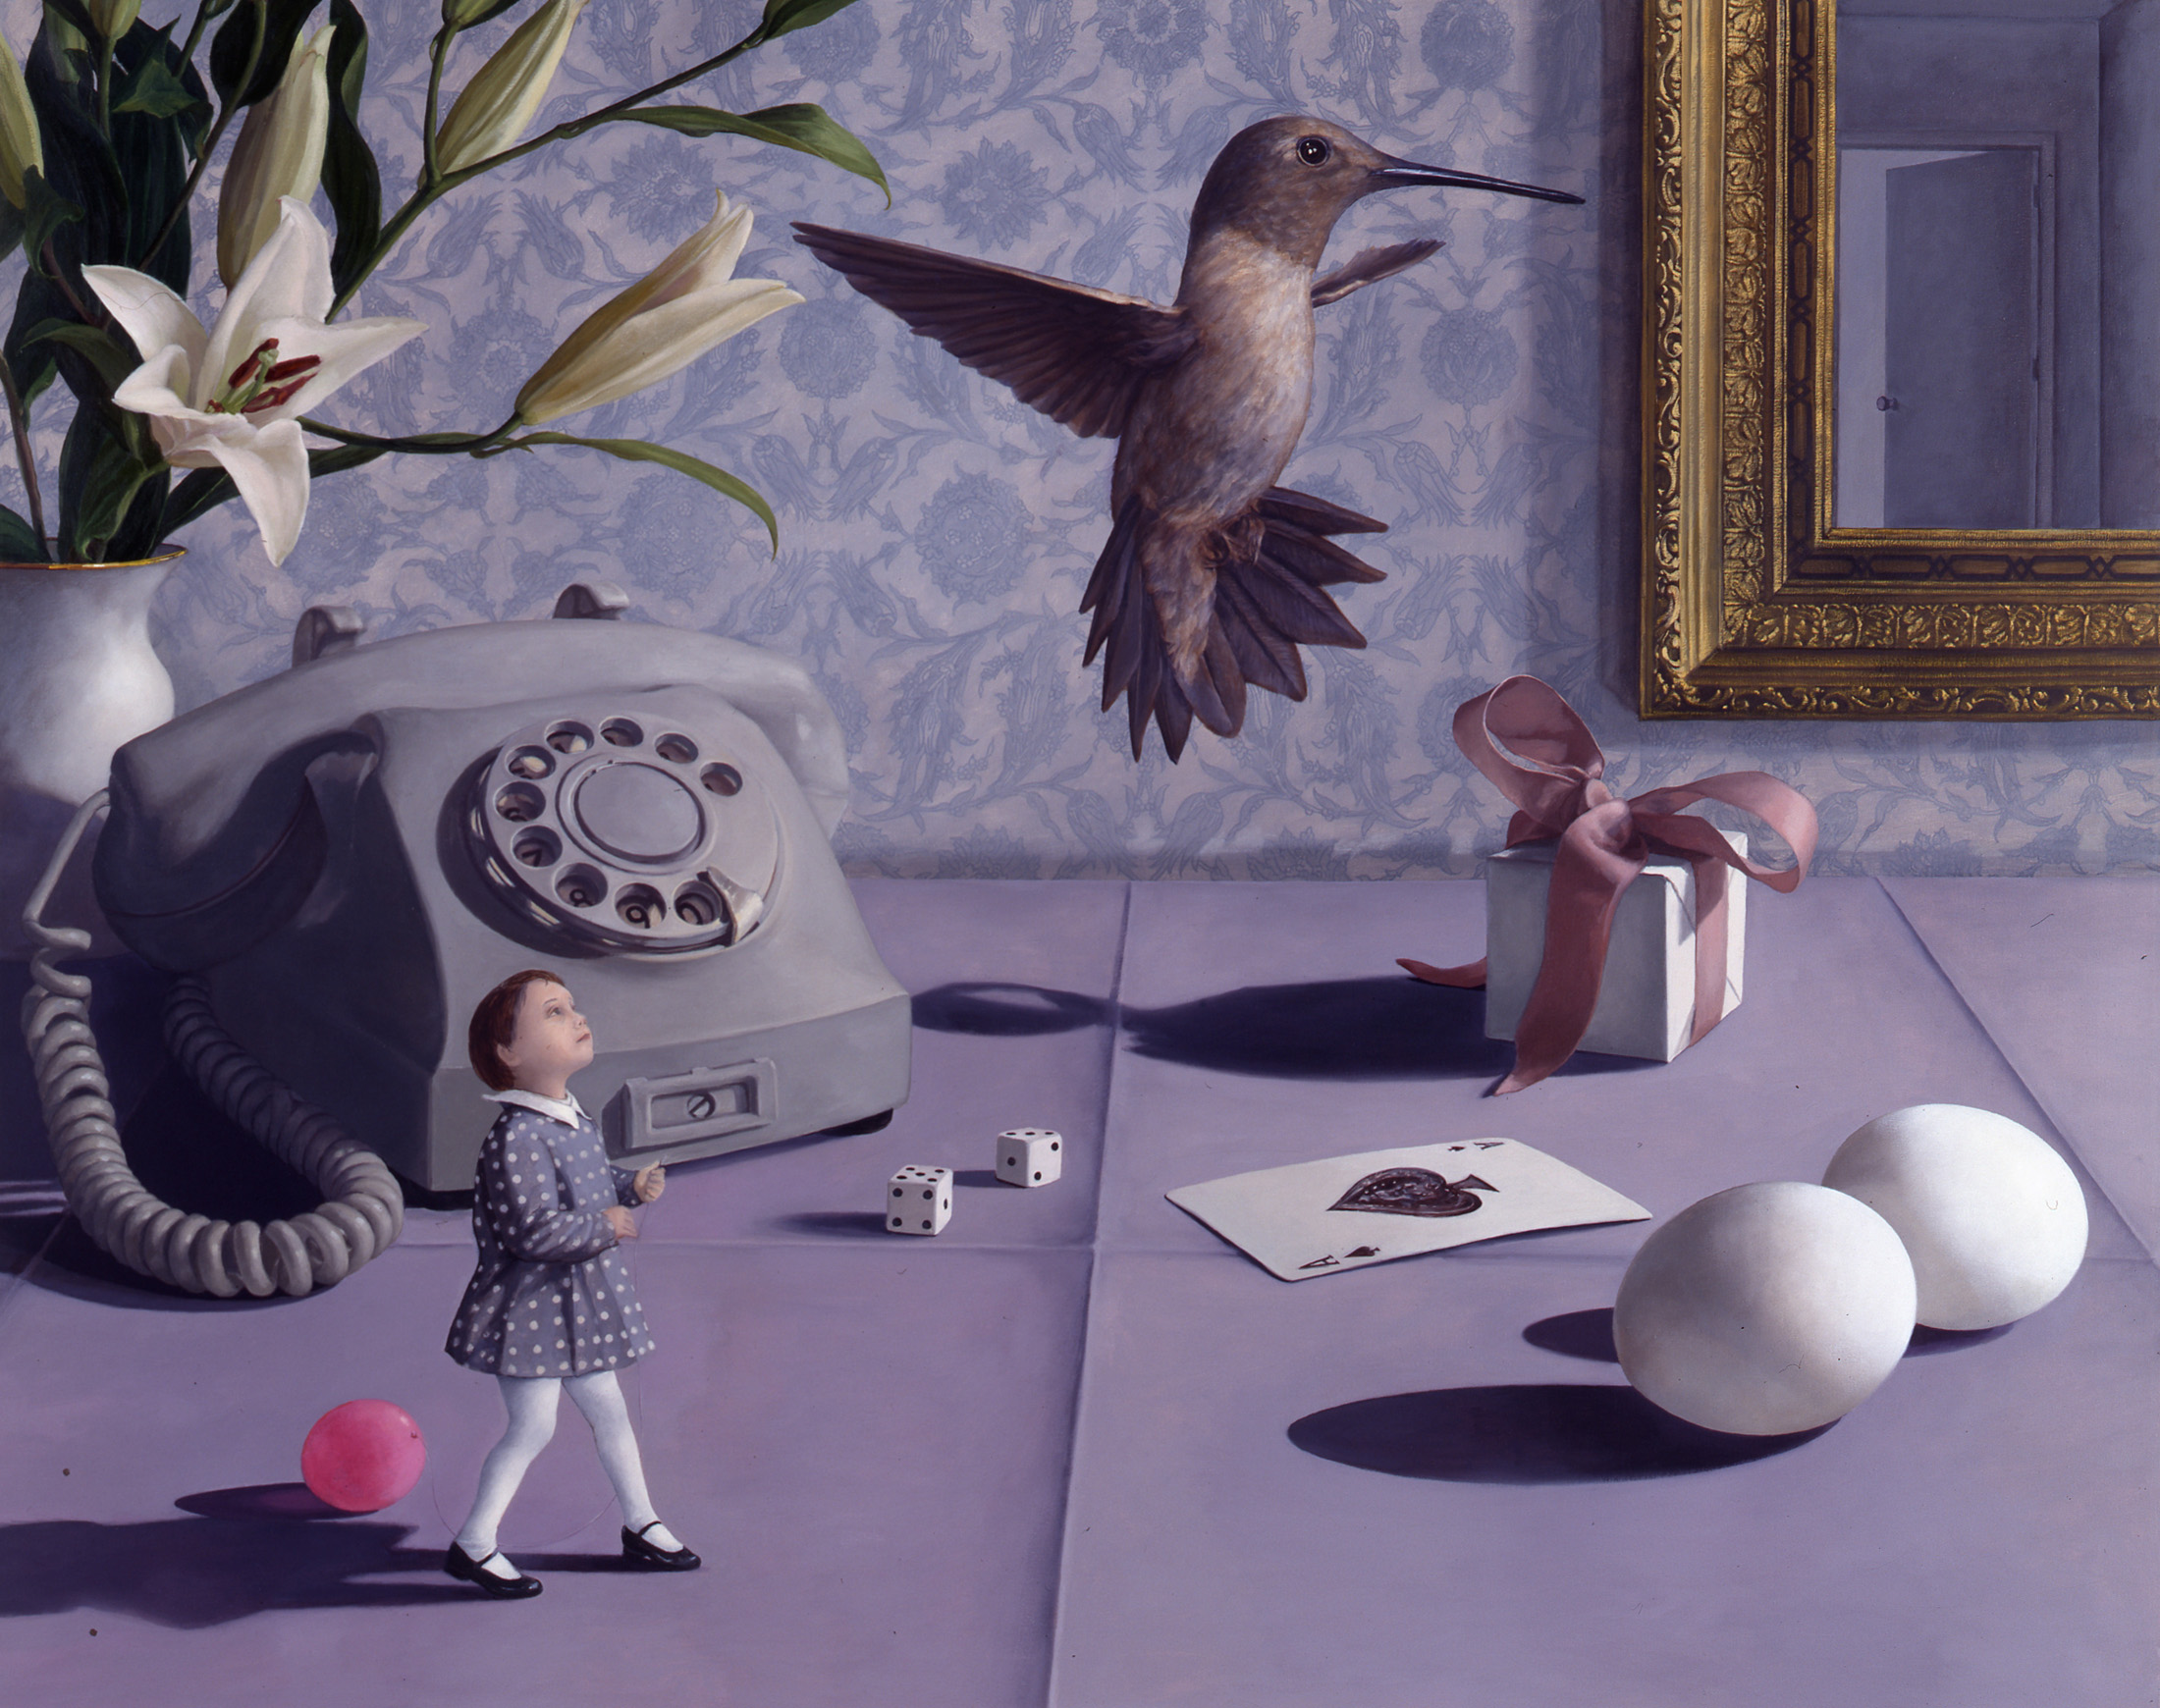 gray vintage telephone, hummingbird, a little girl with a balloon, wallpaper, vase holding lilies, eggs, the ace of spades, a gift with a pink bow